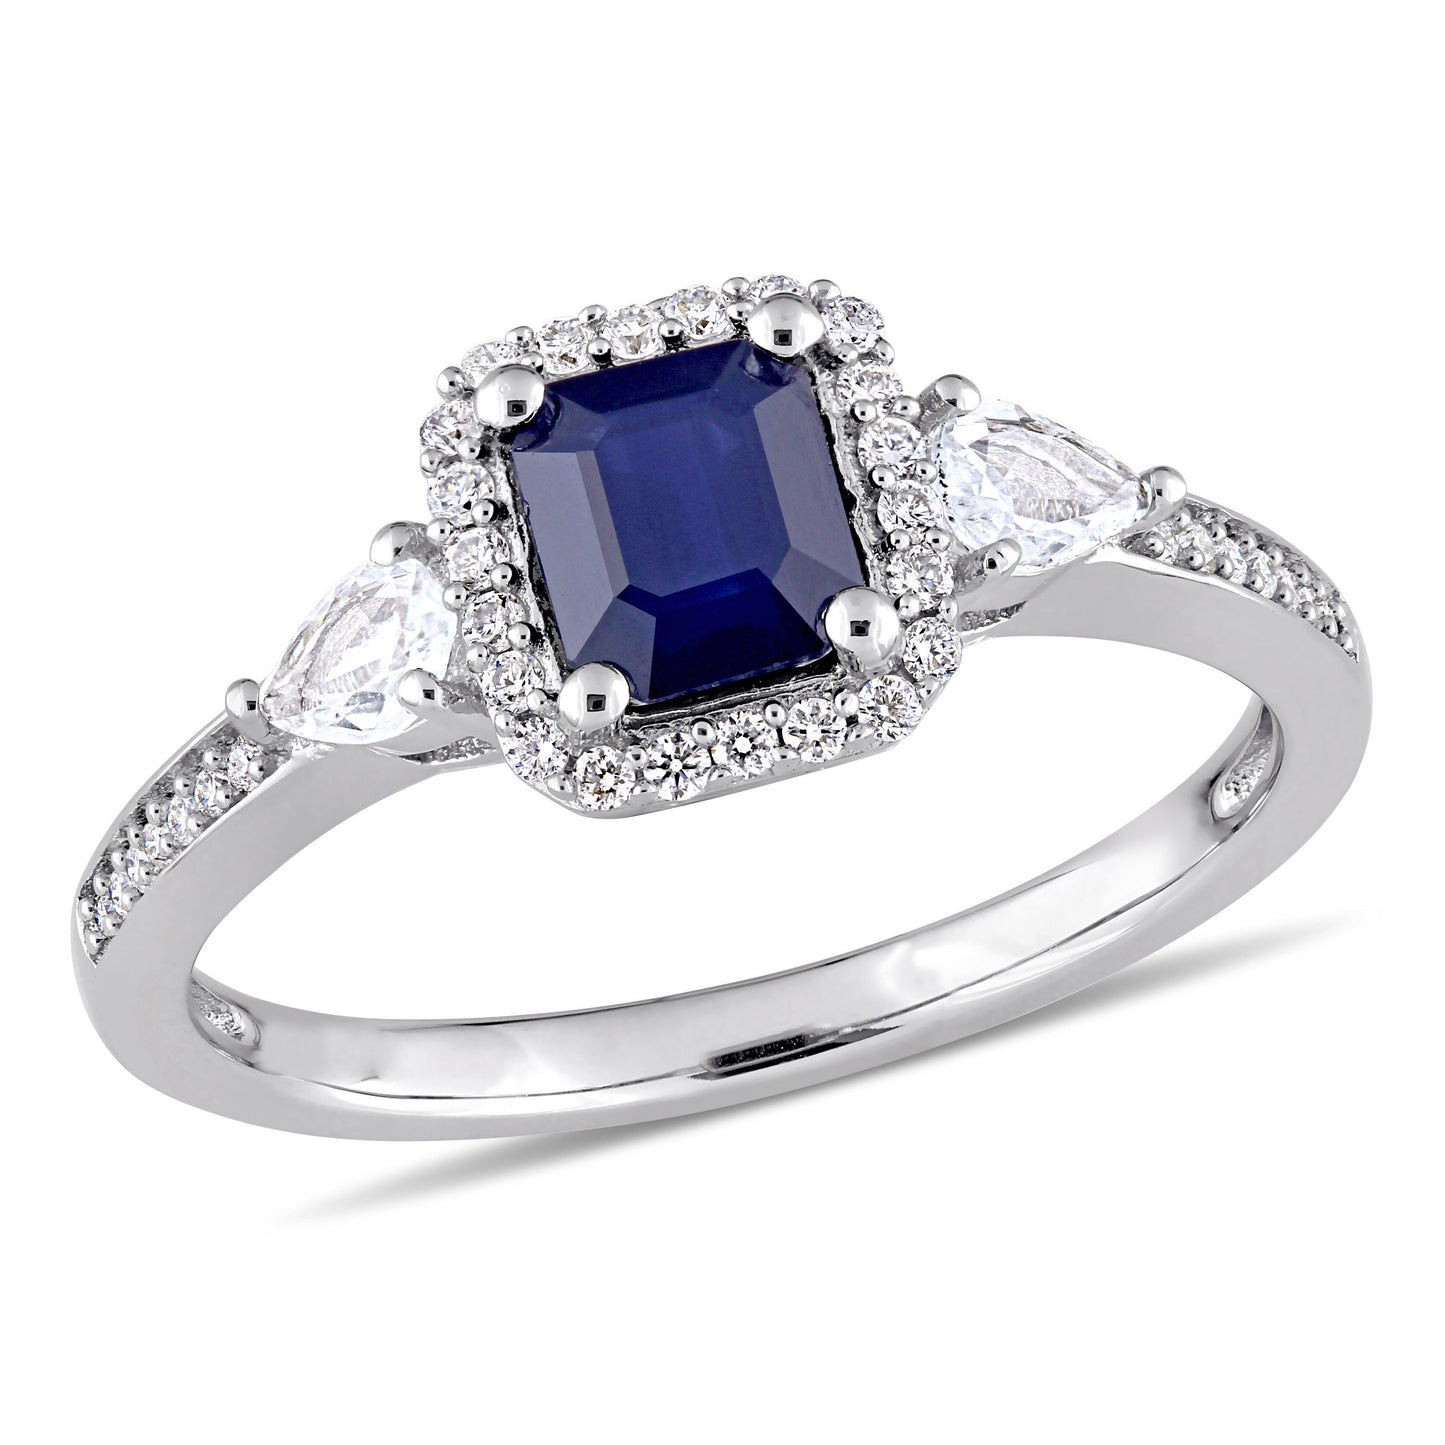 White & Blue Sapphire with Diamonds Engagement Ring 14k White Gold